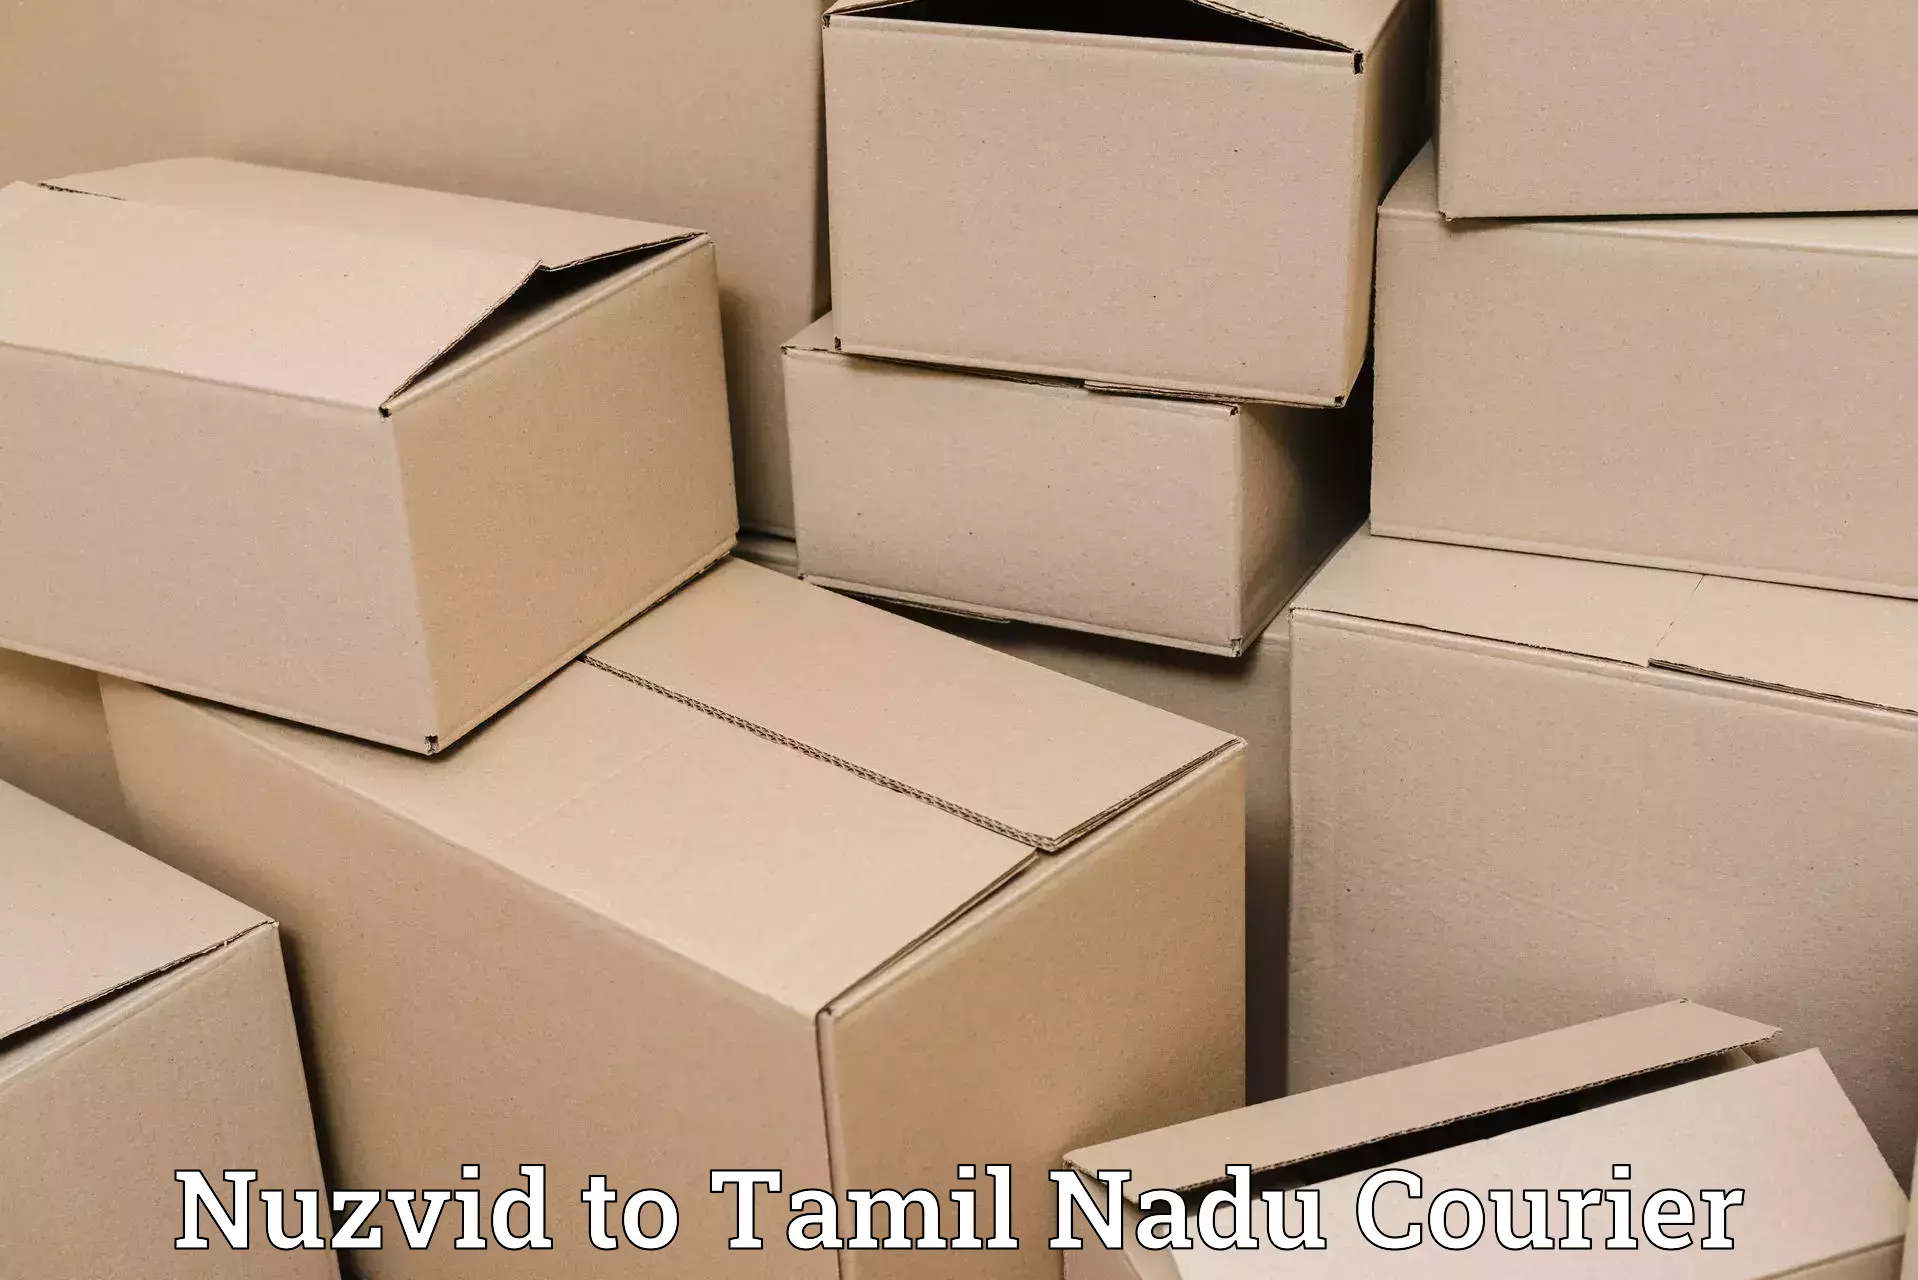 Efficient parcel tracking Nuzvid to Shanmugha Arts Science Technology and Research Academy Thanjavur